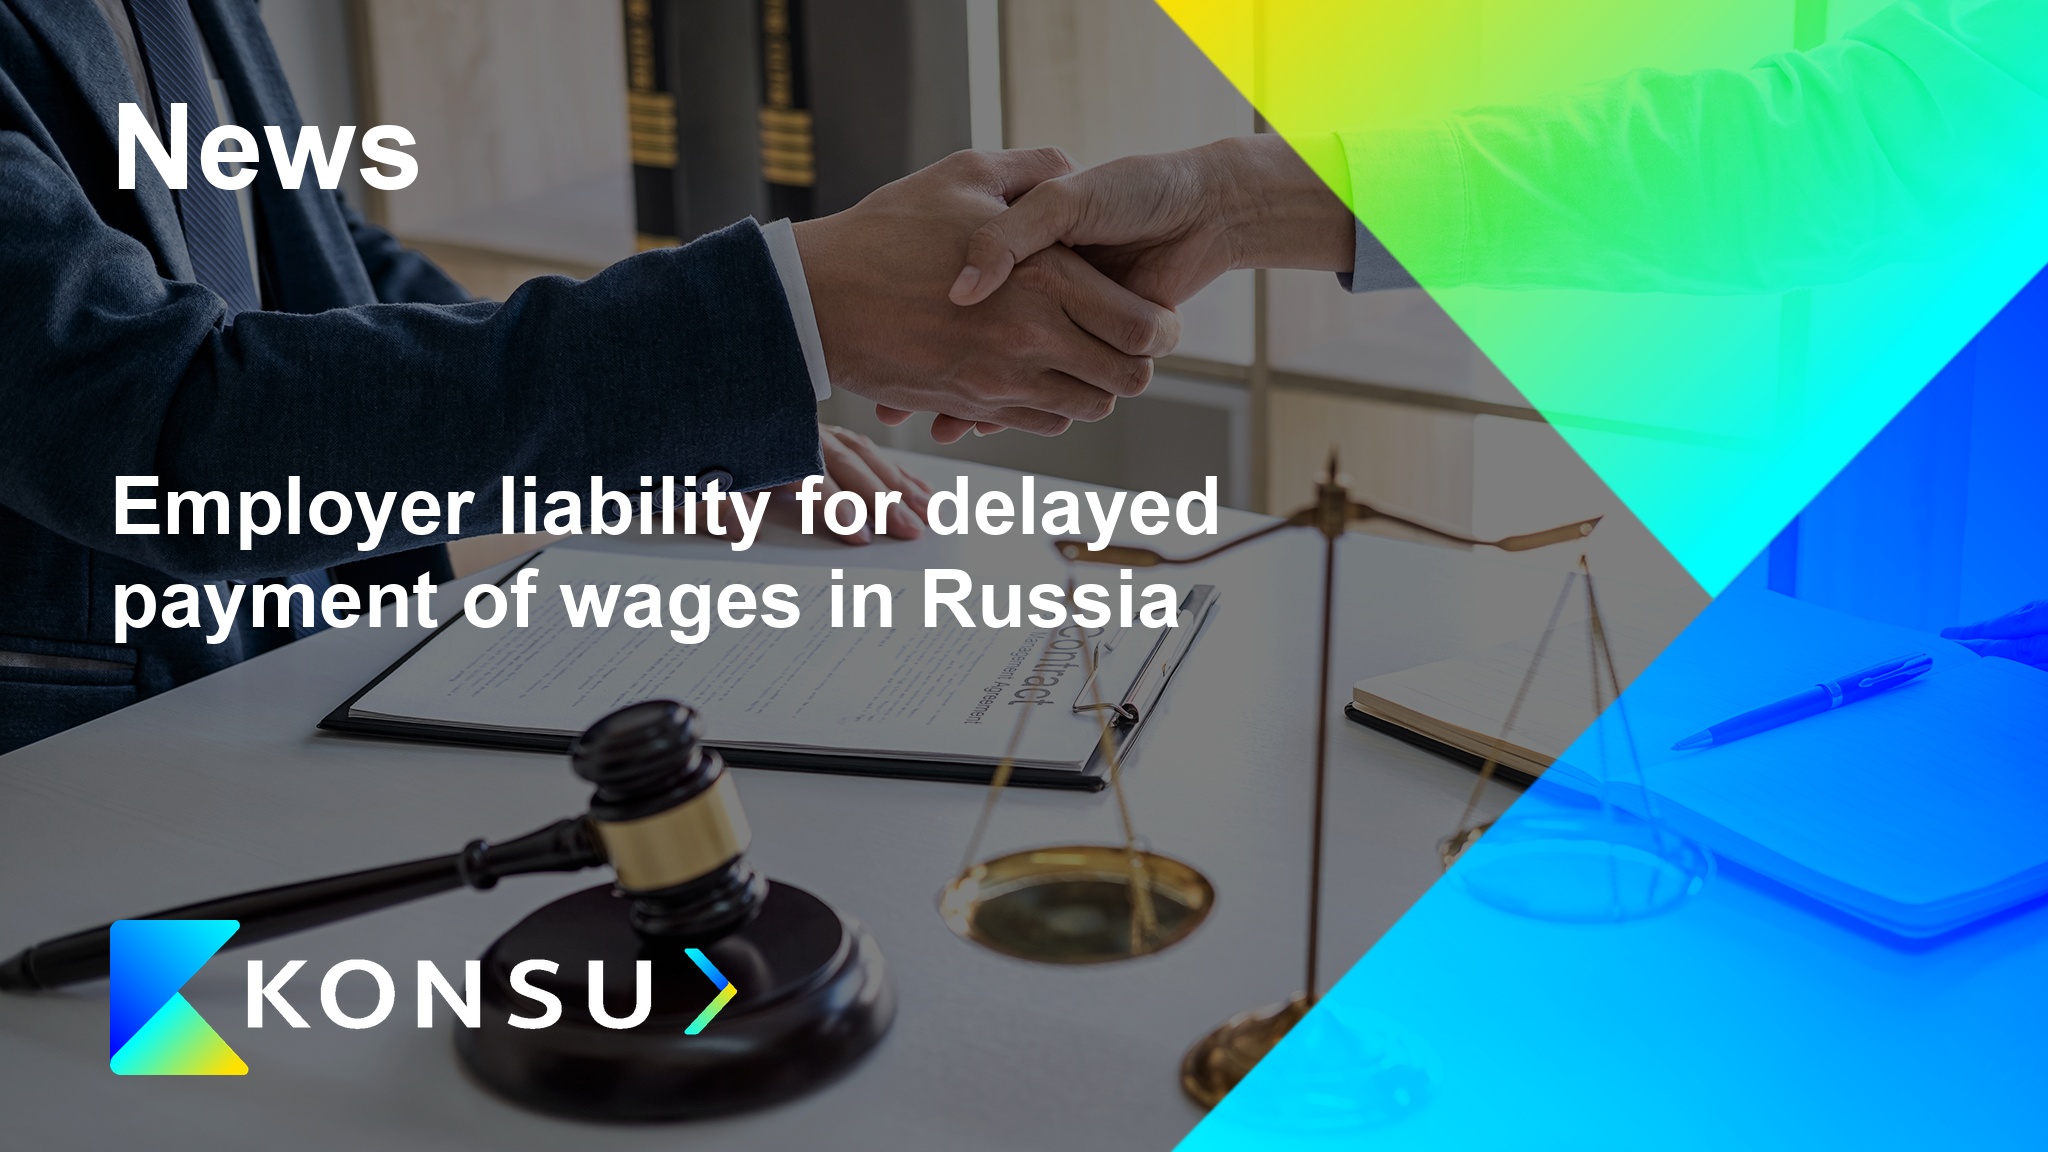 Employer liability for delayed payment wages russia en konsu out